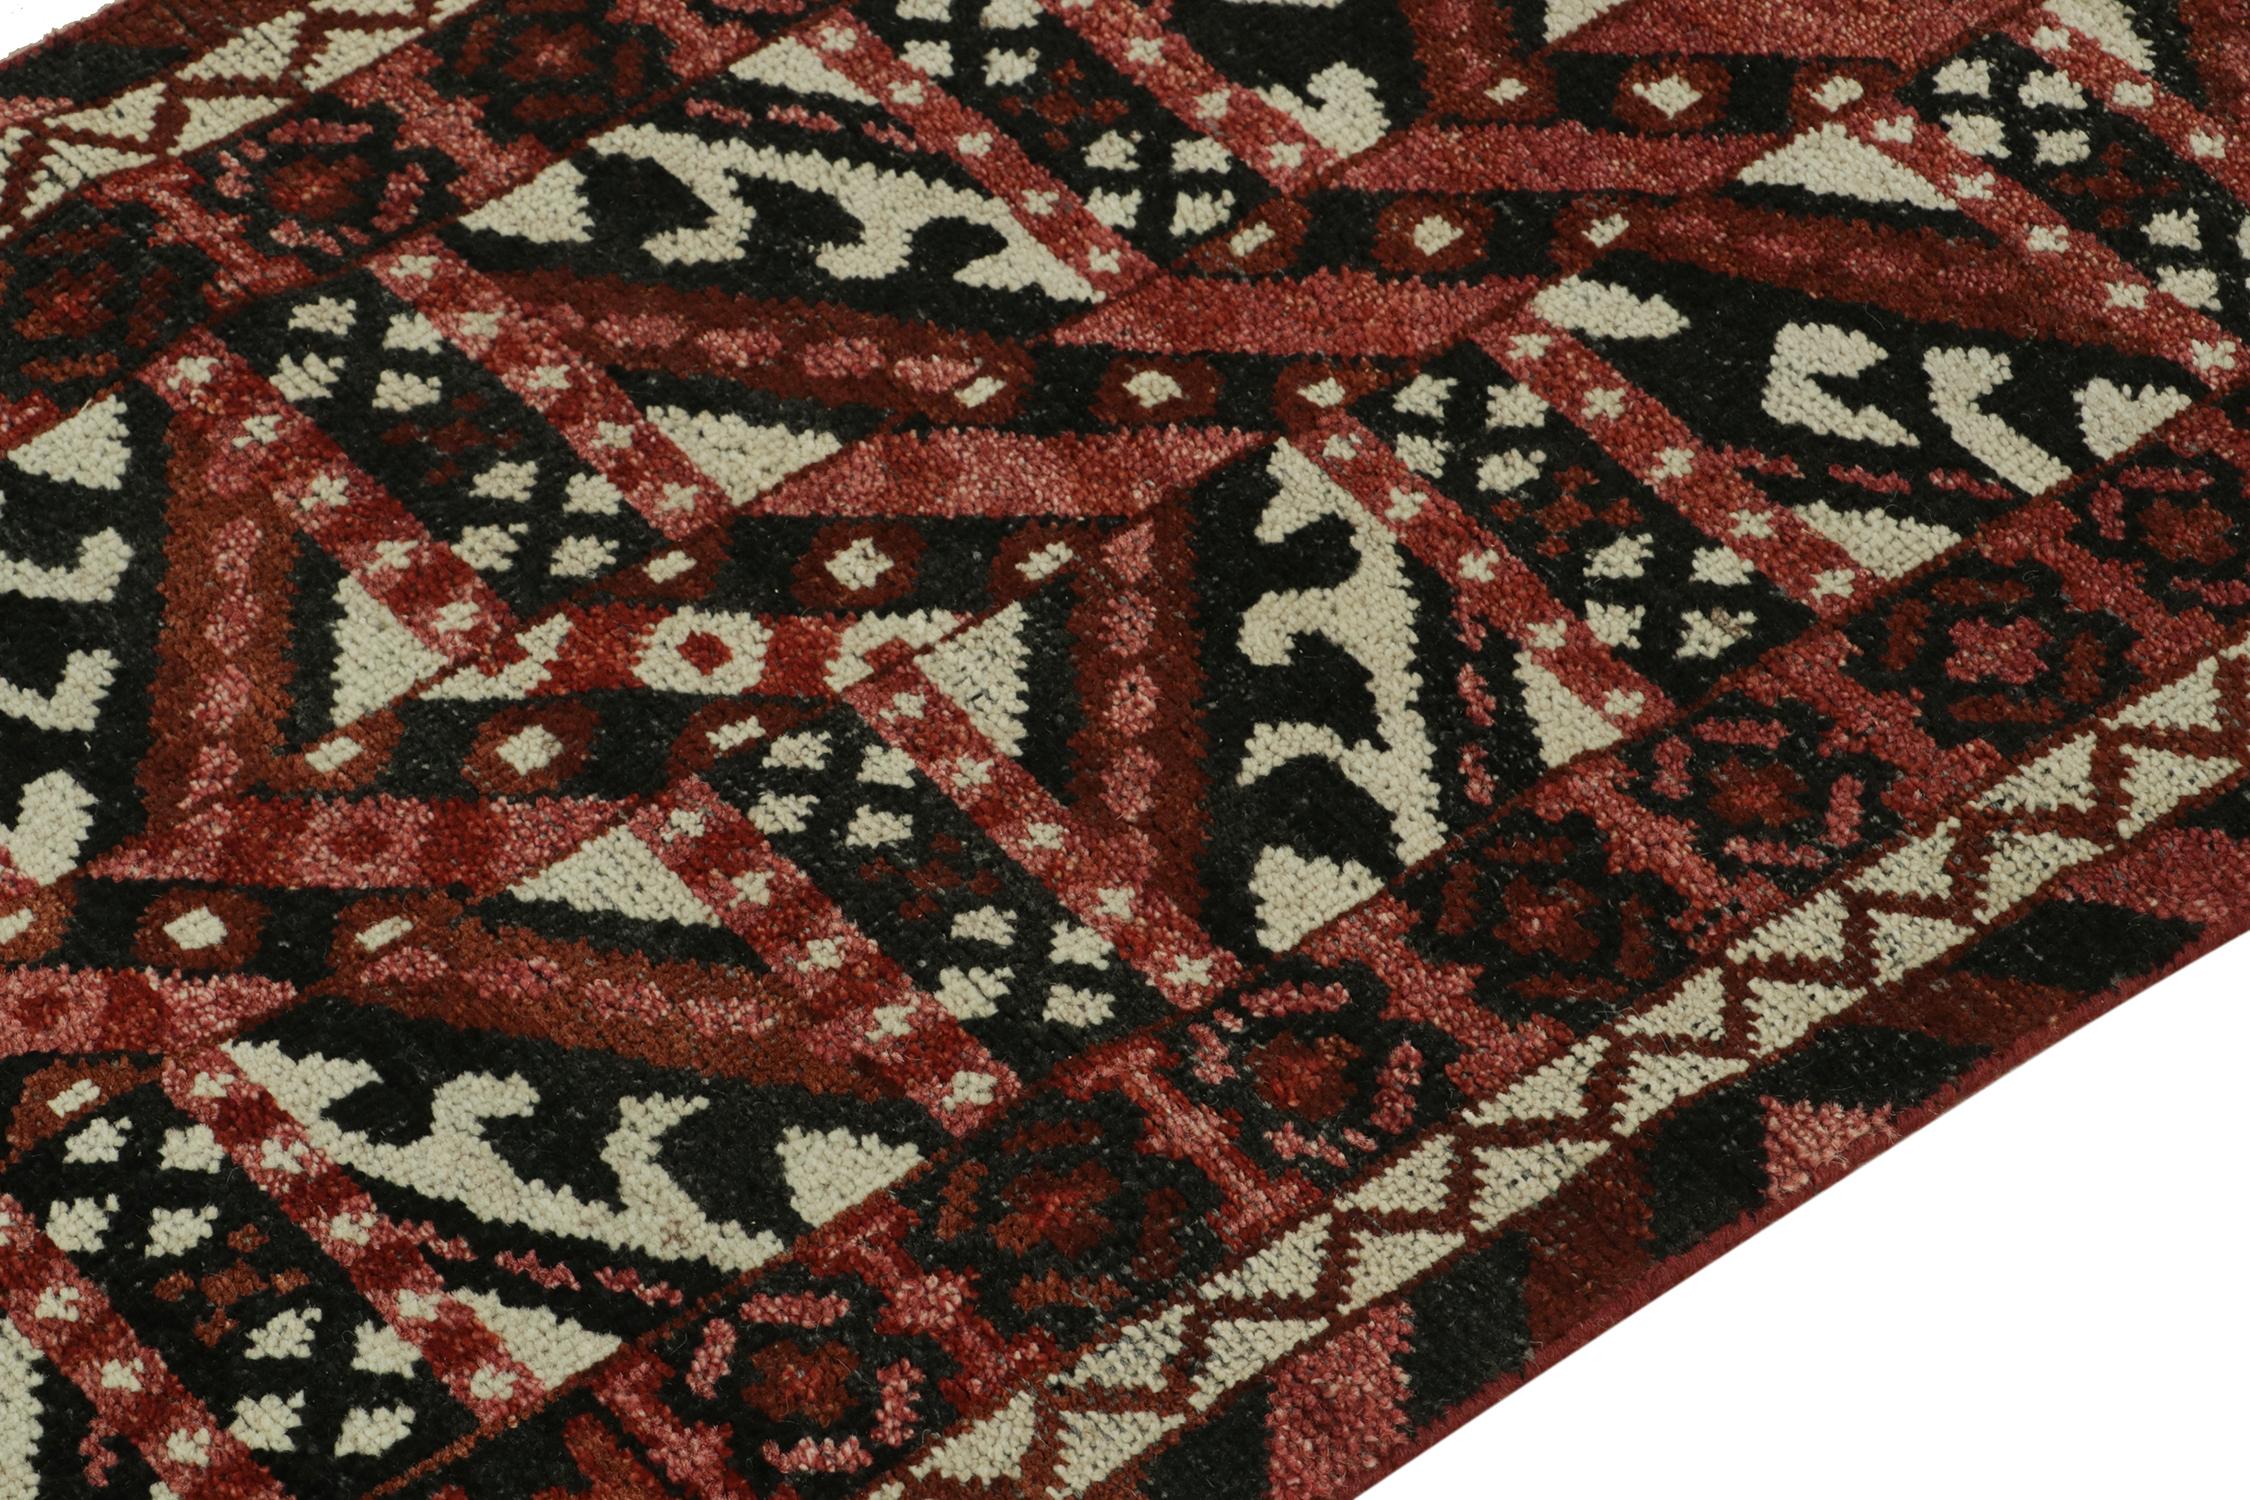 Contemporary Rug & Kilim’s Tribal style runner in red, black and white geometric pattern For Sale